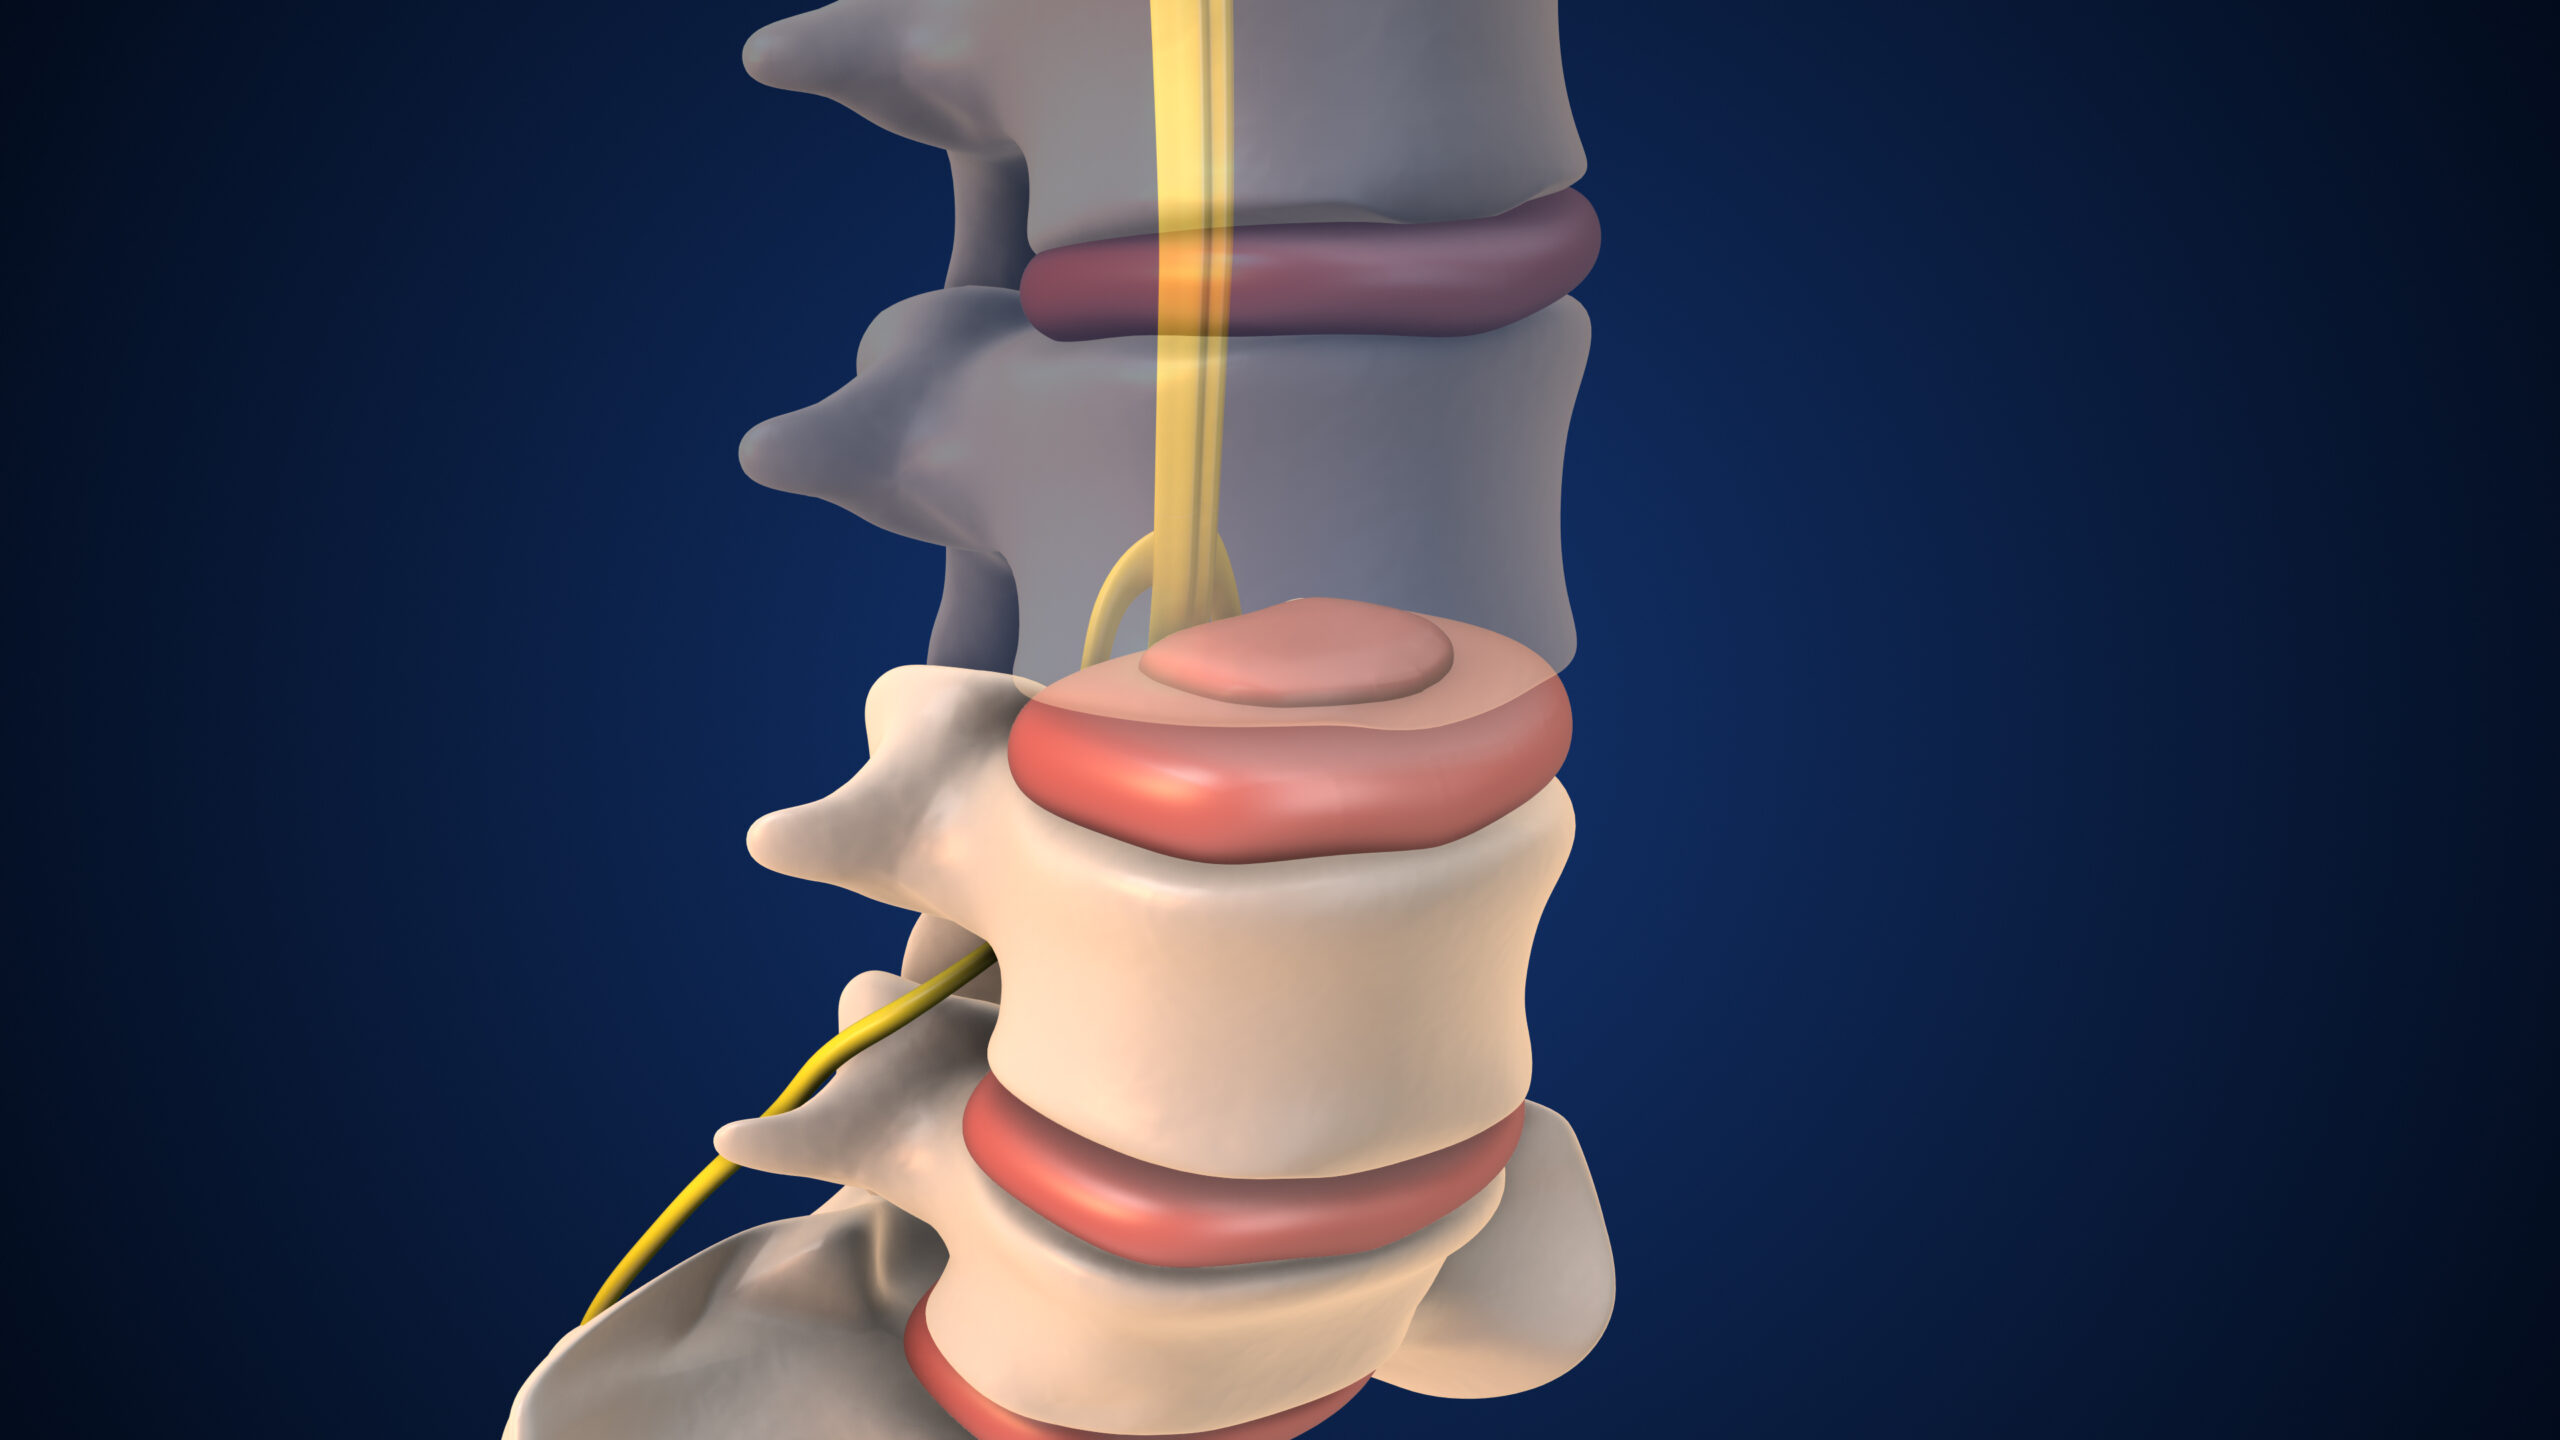 Intradiscal spine treatment options